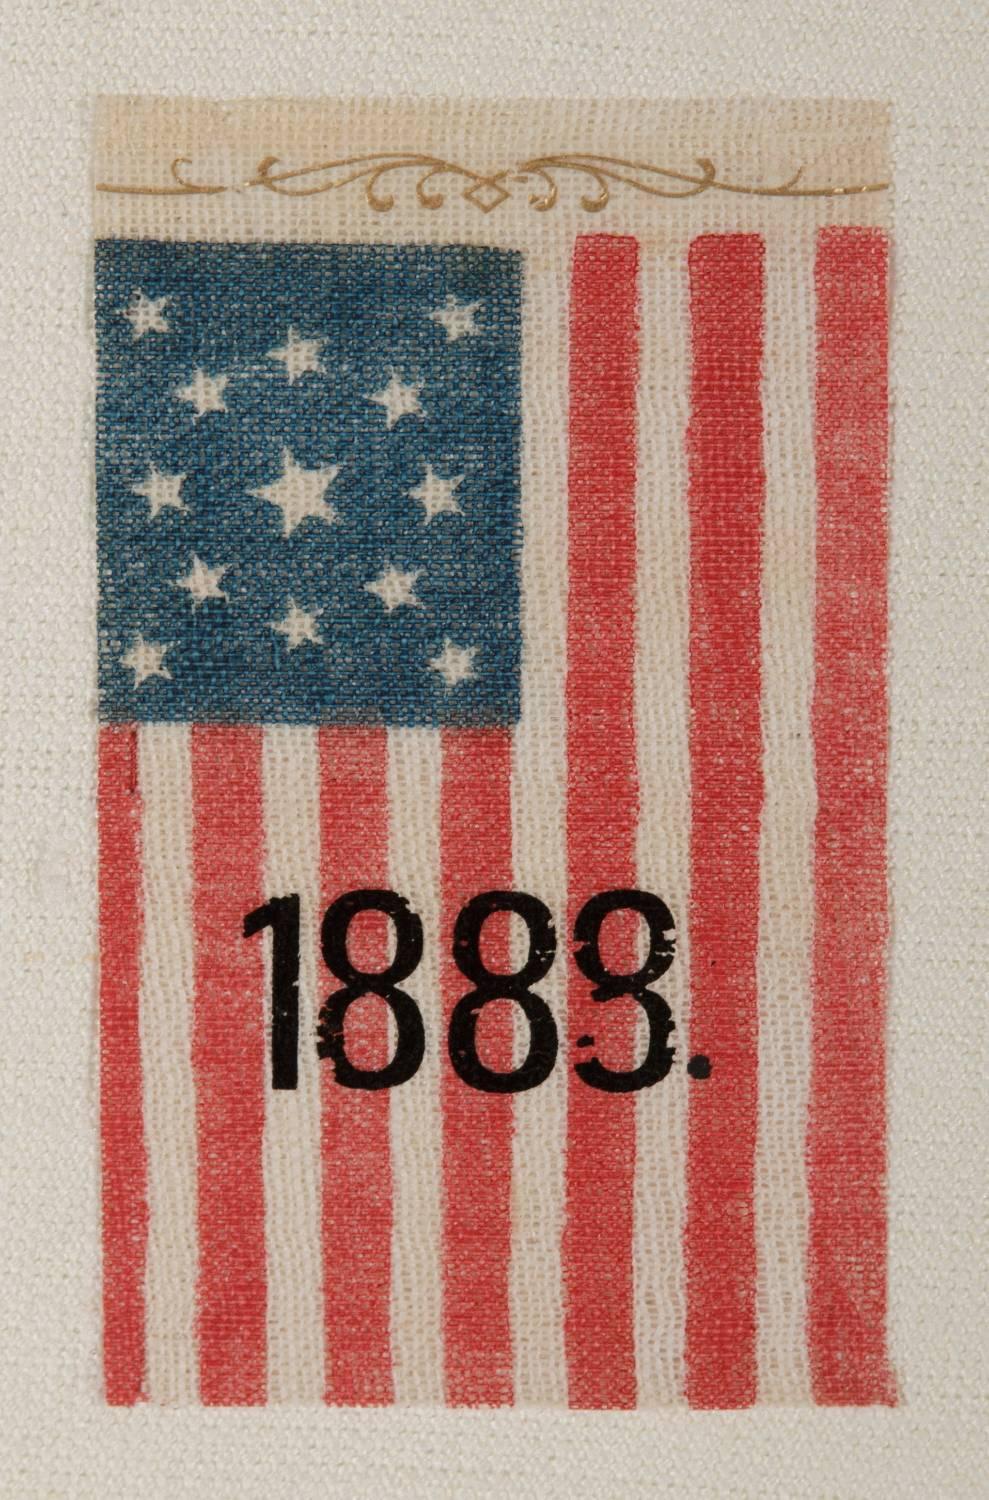 13 STAR, CENTENNIAL ERA, ANTIQUE AMERICAN PARADE FLAG WITH UNUSUAL OVERPRINTED 1888 DATE AND SCROLL WORK, PROBABLY MADE FOR A BENJAMIN HARRISON RALLY IN THIS PRESIDENTIAL ELECTION YEAR: 

13 star American national parade flag, printed on coarse,